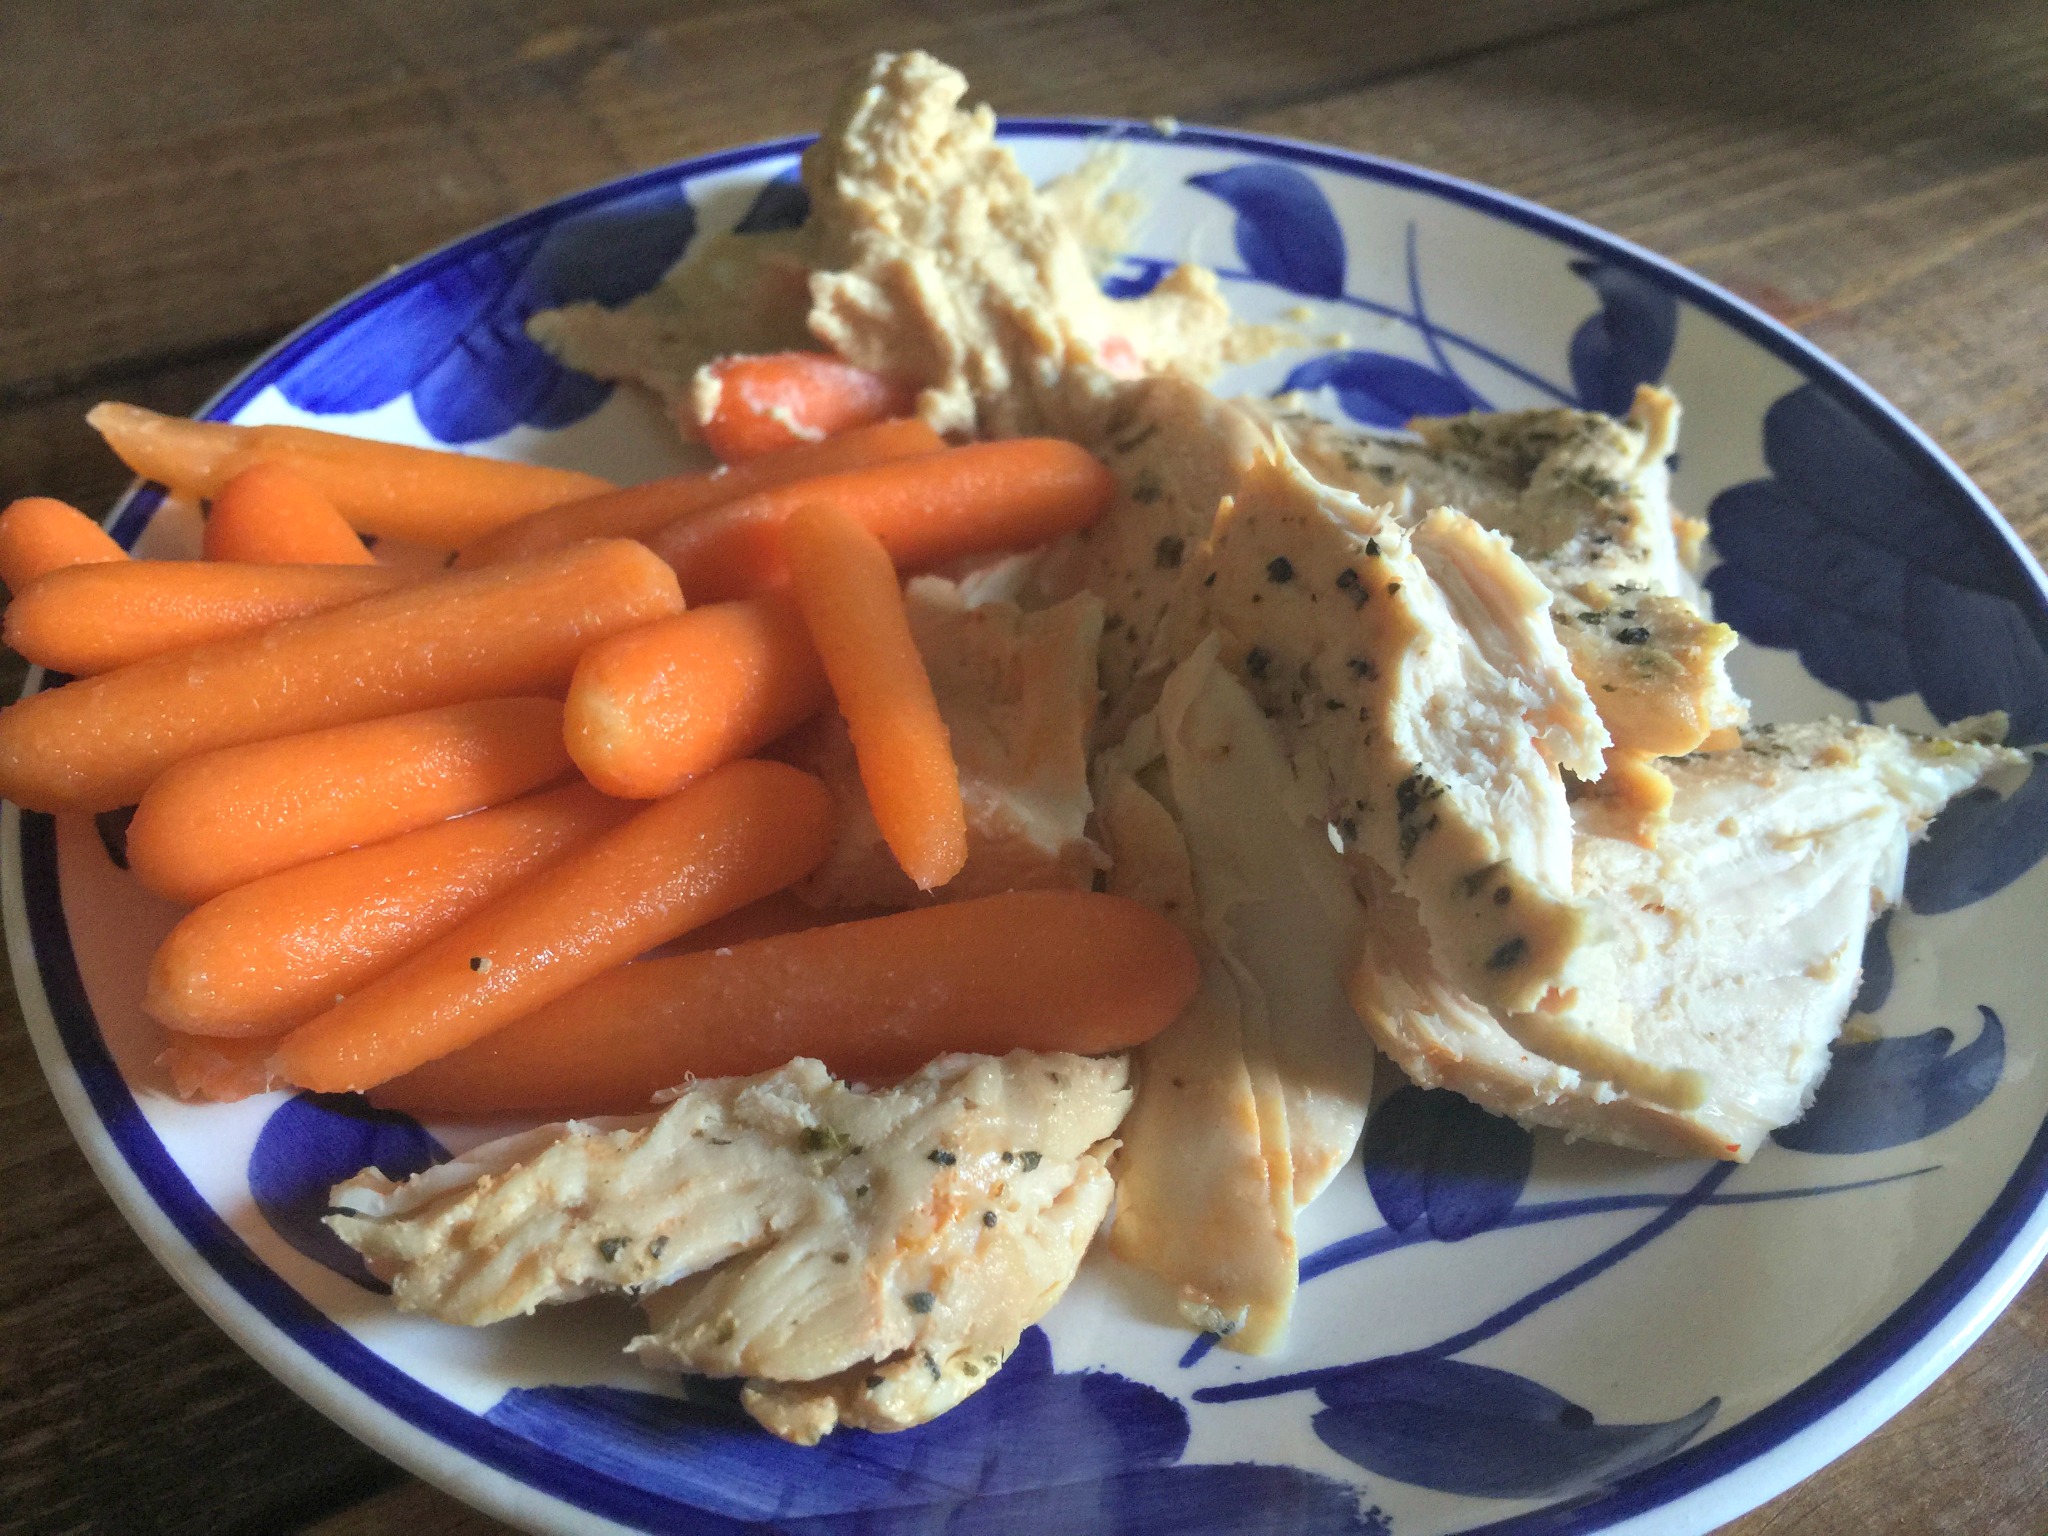 chicken, carrots, and hummus 